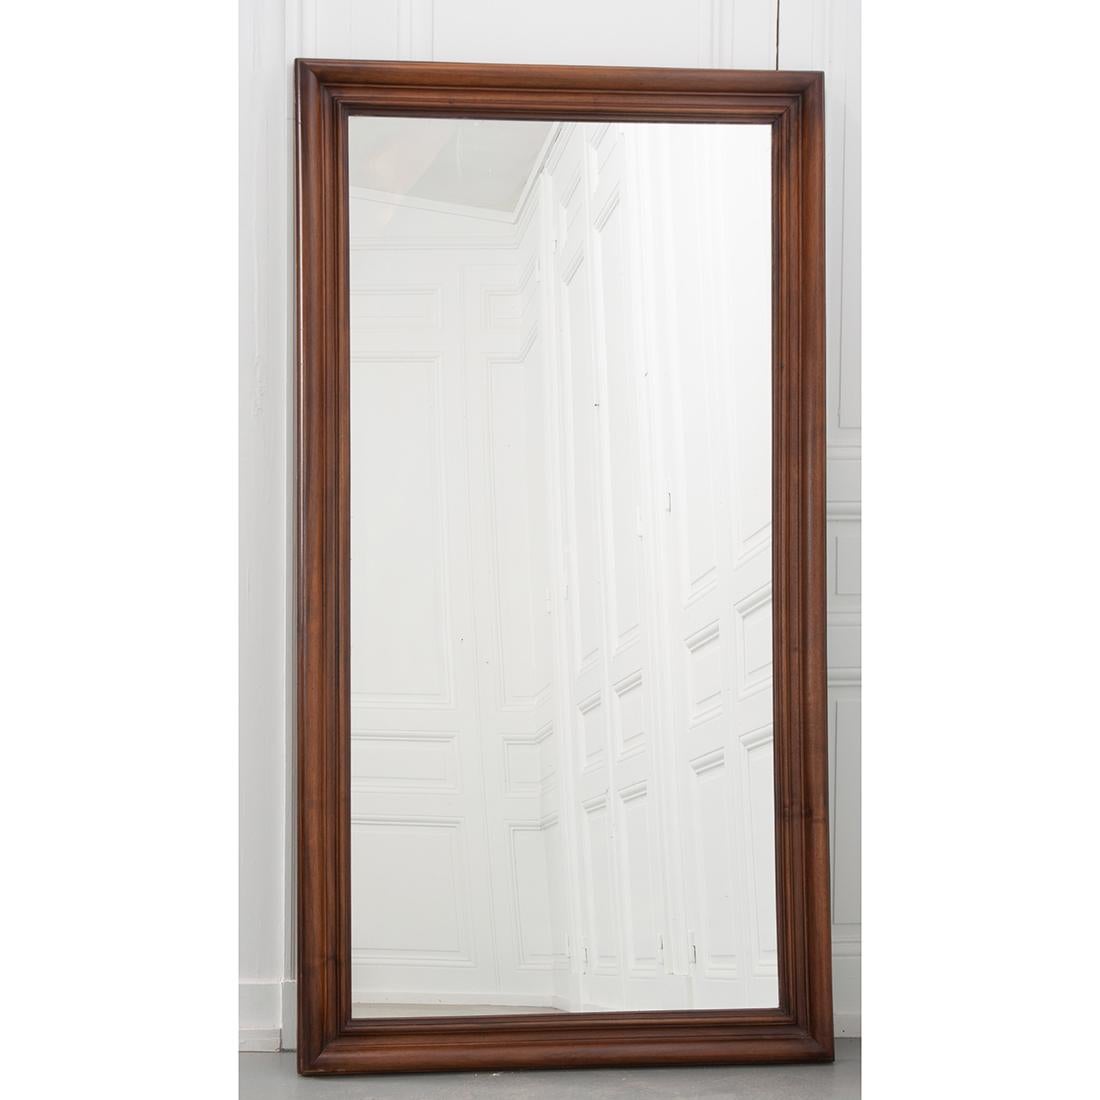 This handsome walnut mirror is from France and features its original mirror plate exhibiting crystallization. Uncomplicated yet substantial and attractive, this mirror is sure to add Provincial charm to any room you choose.